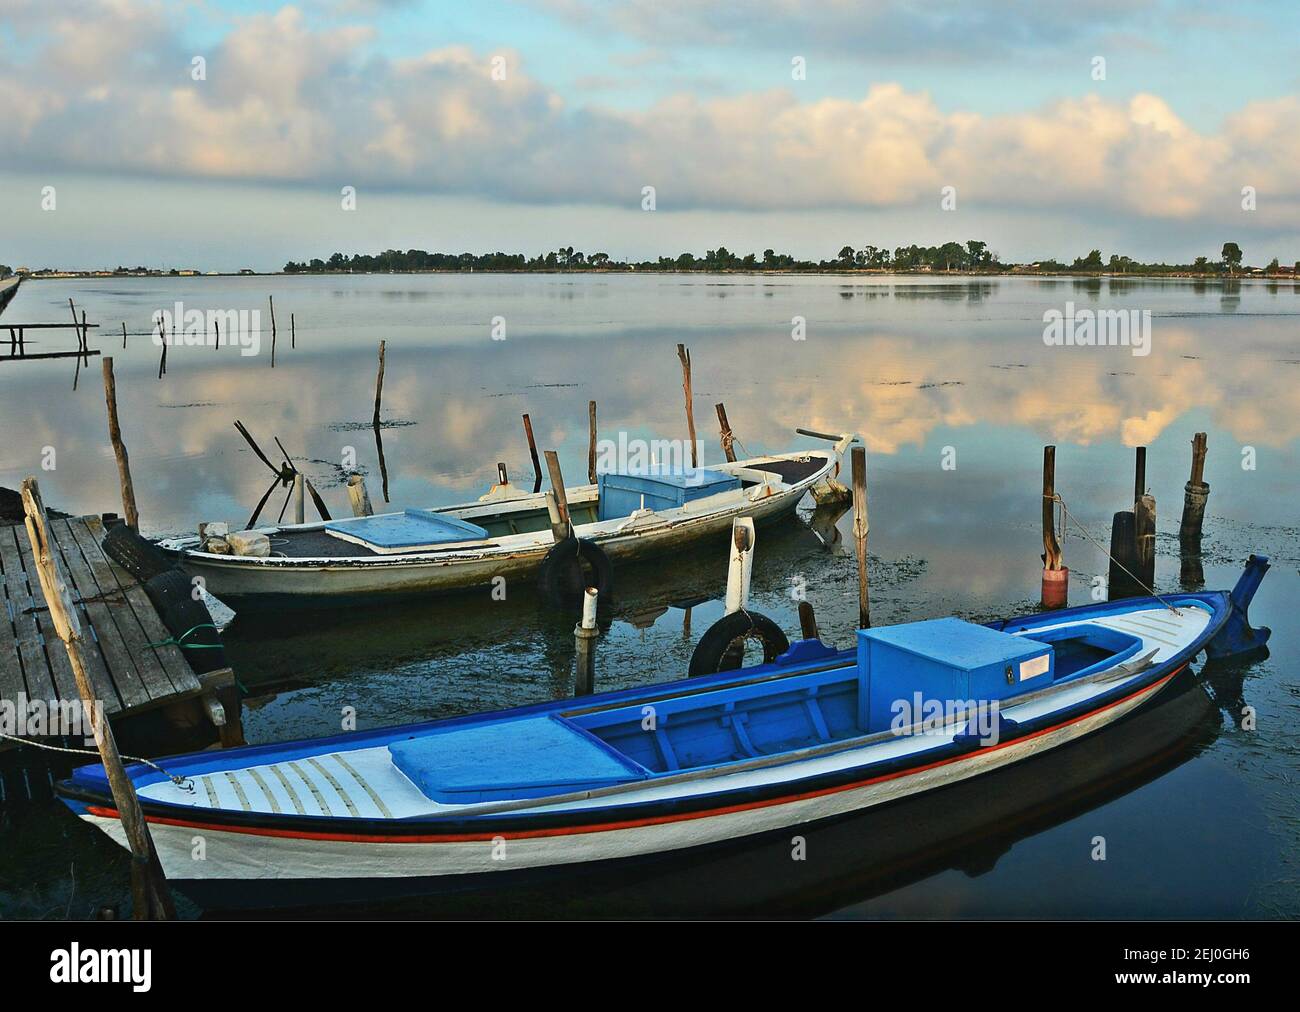 Landscape with traditional Greek fishing boats on the waters of Missolonghi Lagoon in Aetolia-Acarnania, Greece. Stock Photo